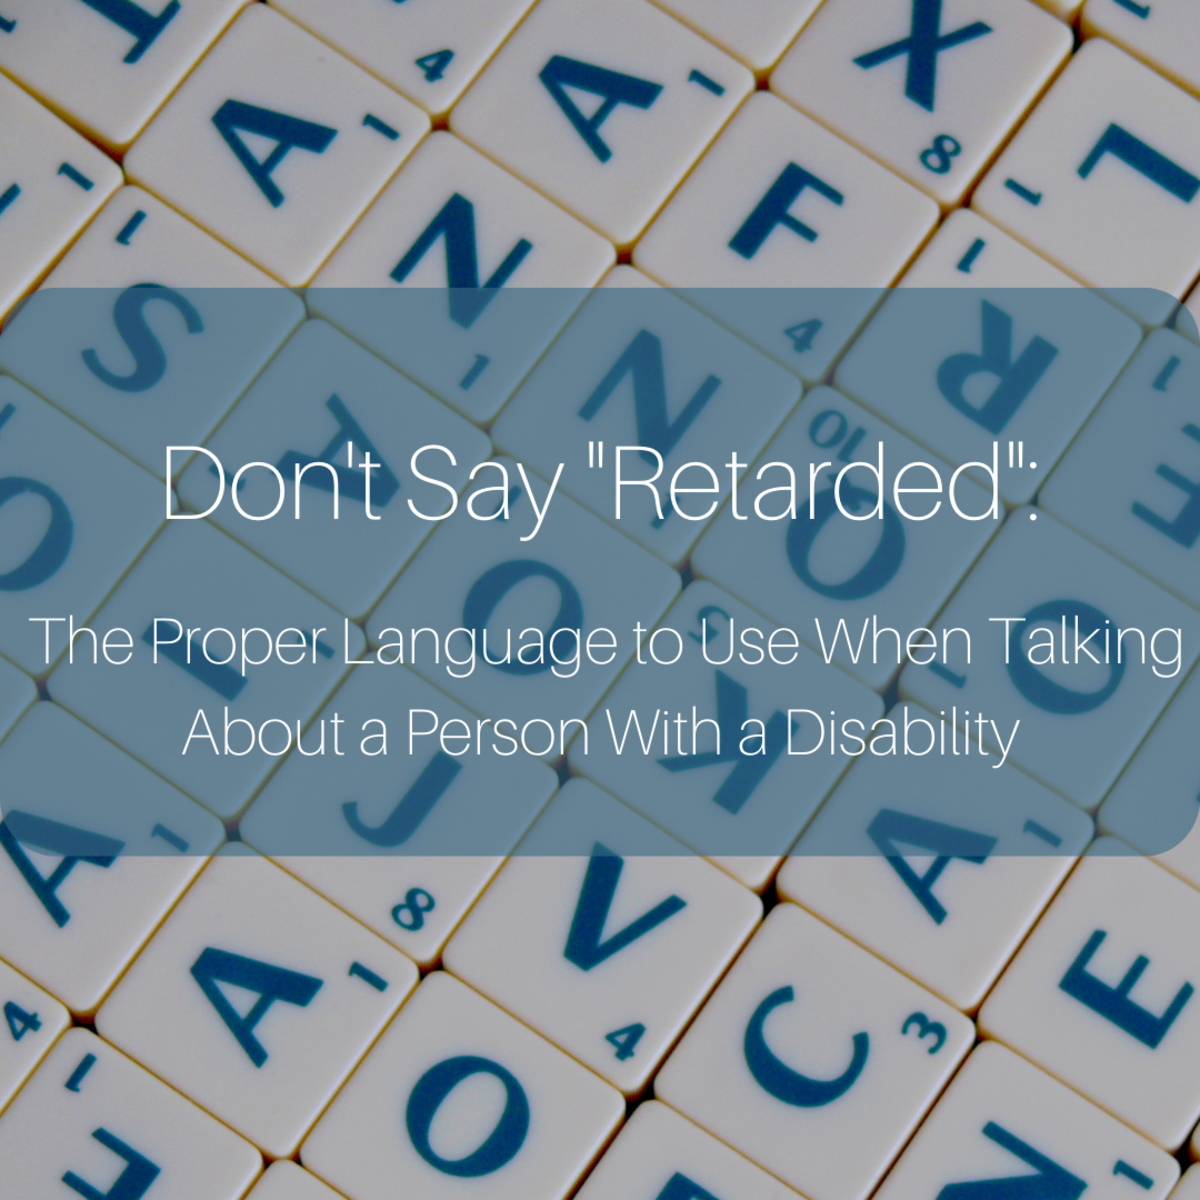 Learn what the proper language is when referring to a person with a disability. 